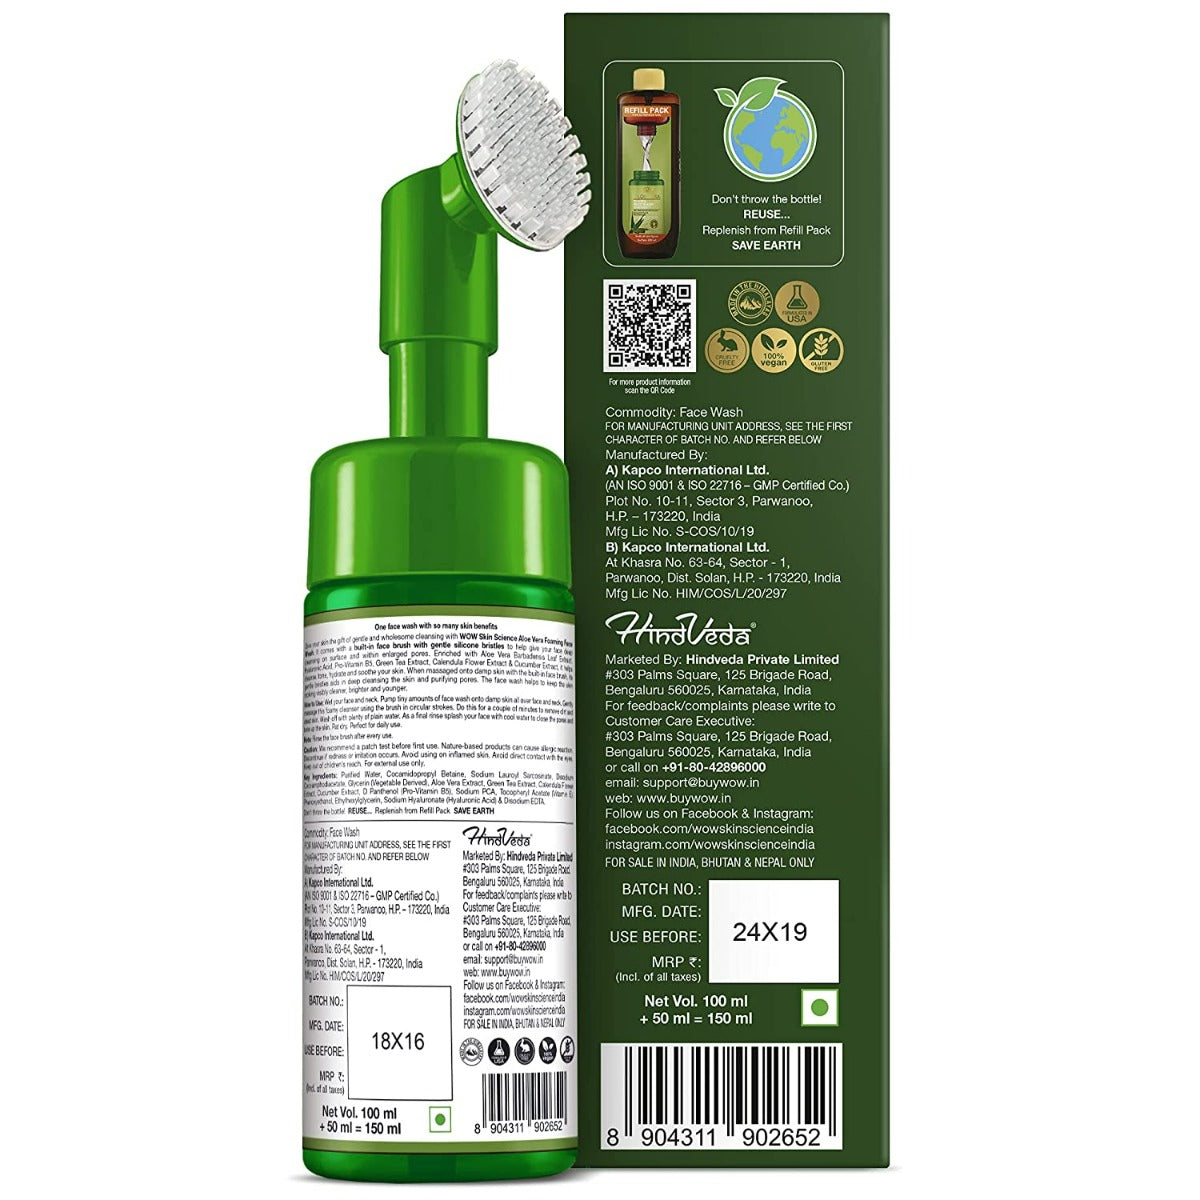 Wow Skin Science Aloe Vera Face Wash with Brush (150ml)